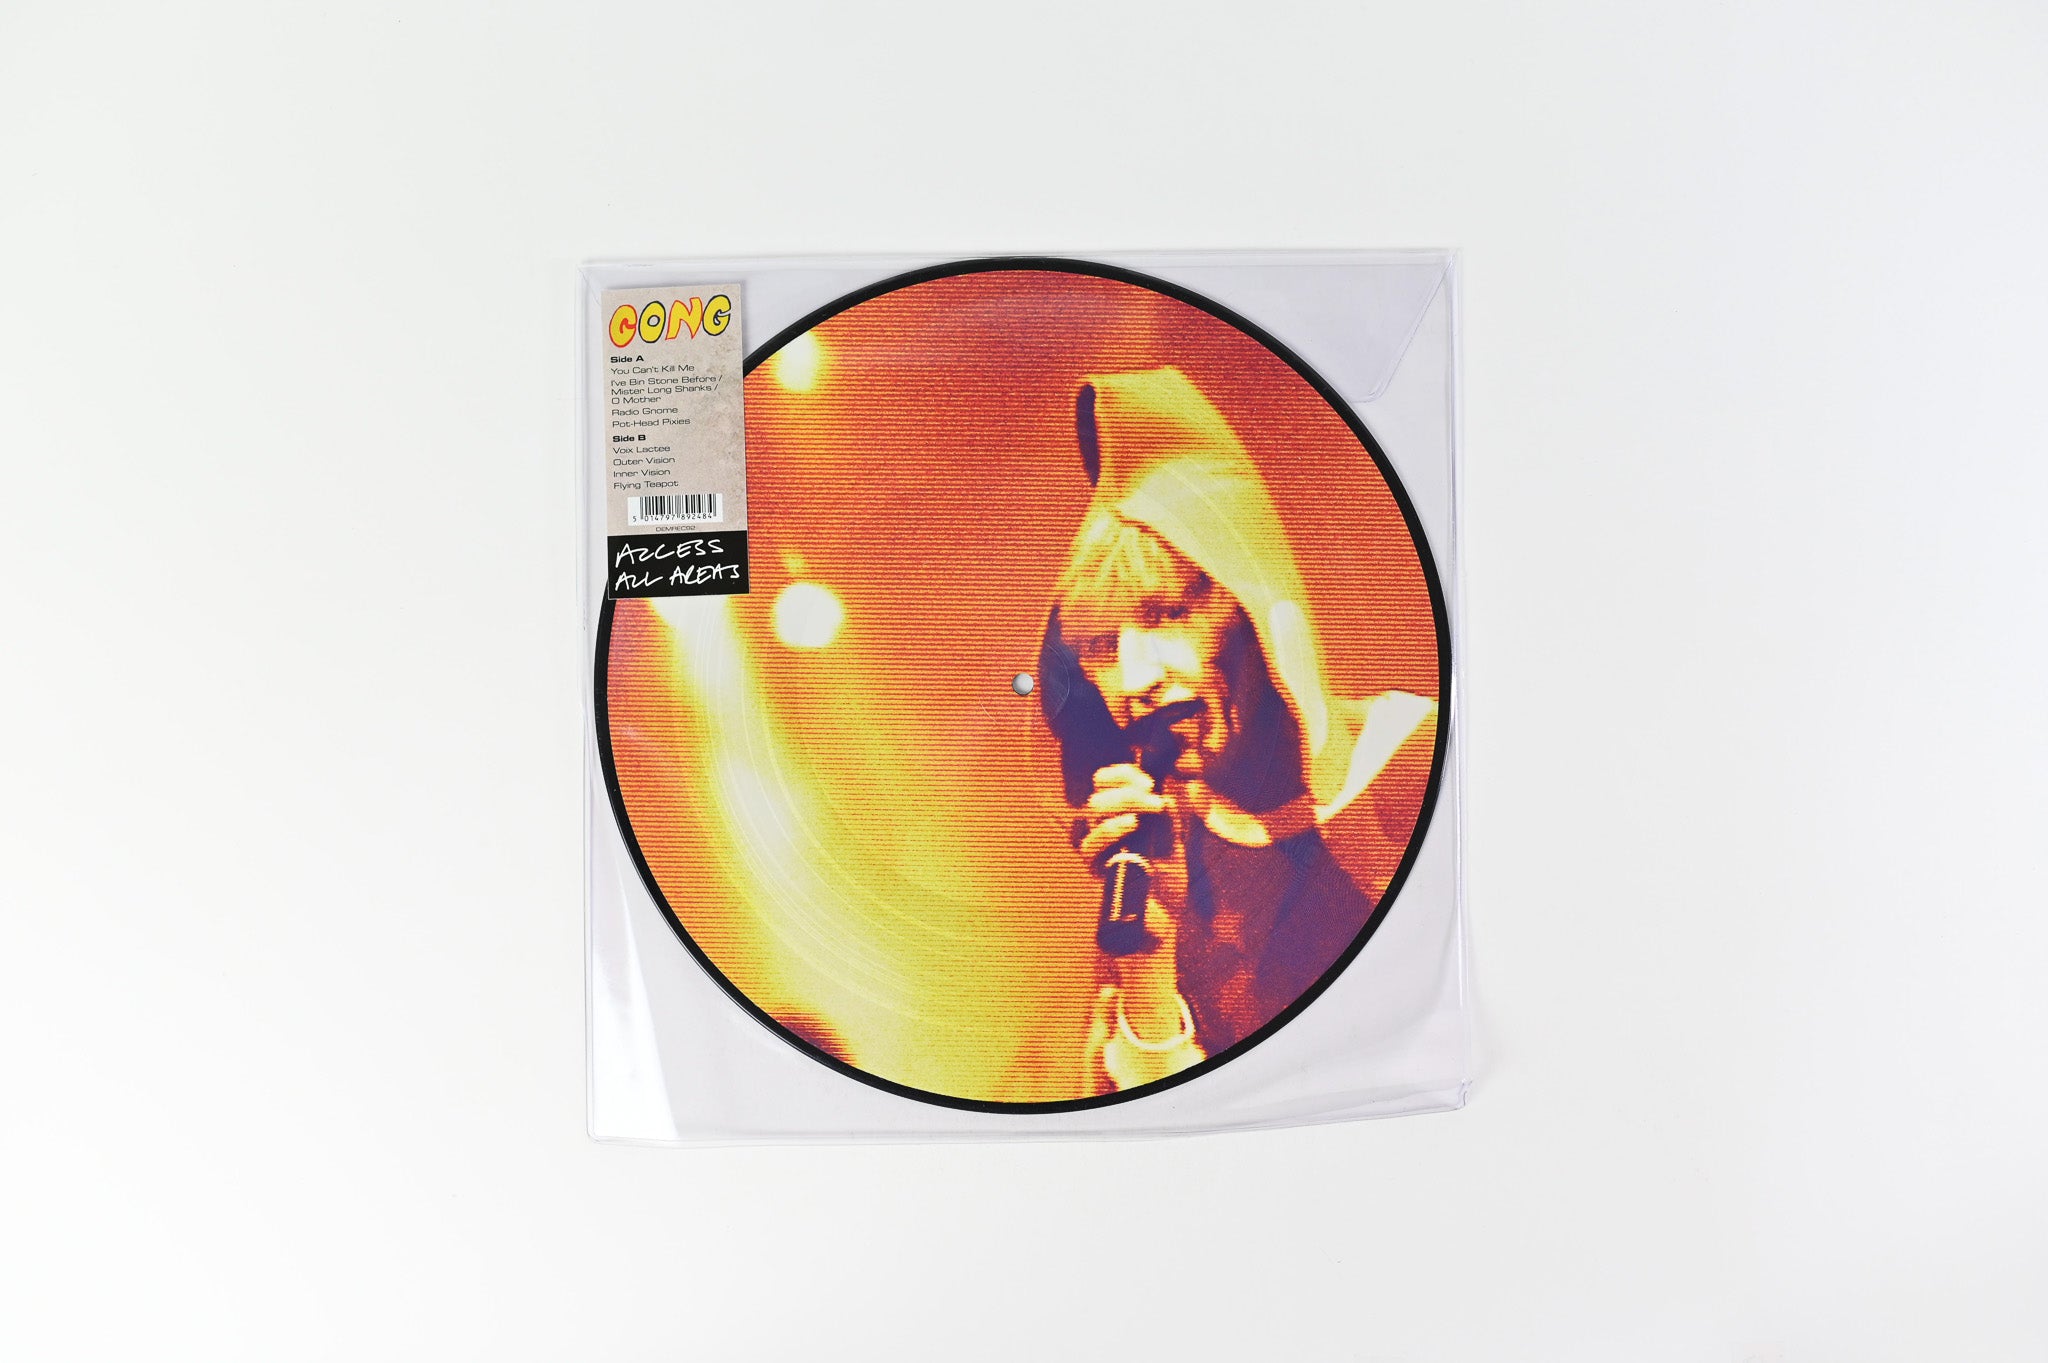 Gong - Access All Areas on Demon Ltd Picture Disc Reissue